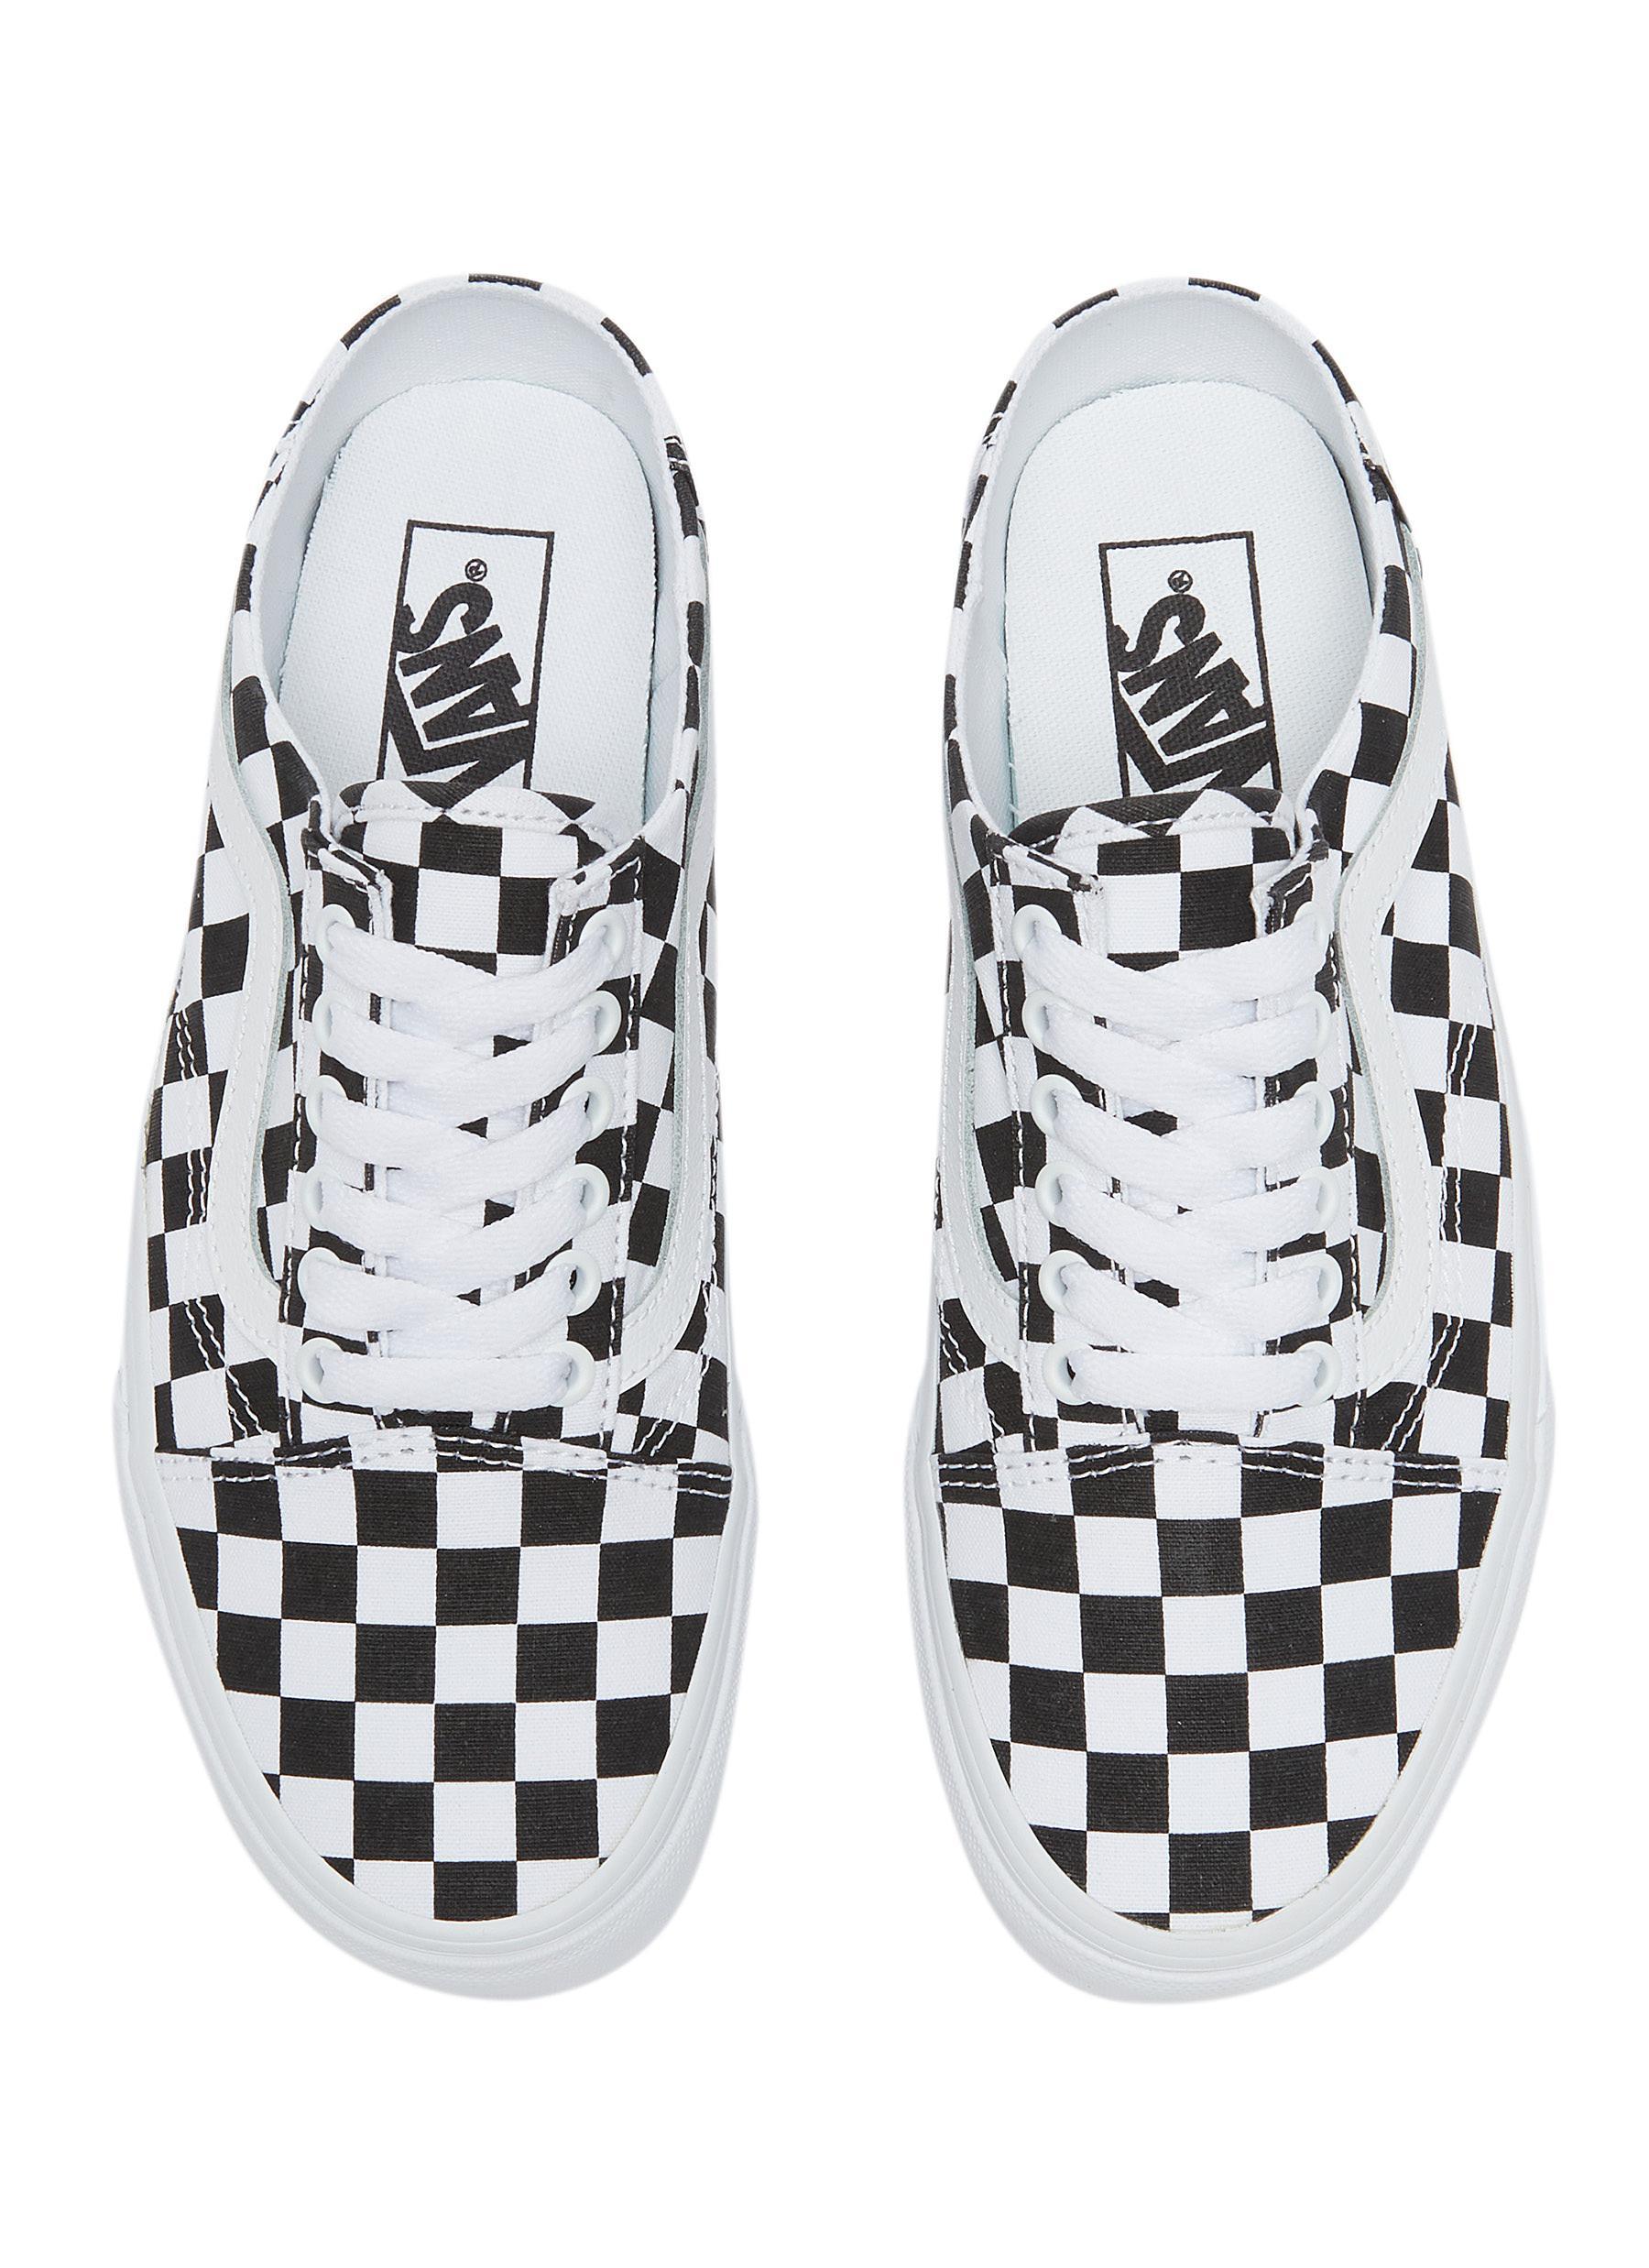 Vans Rubber Old Skool' Checkered Slip-on Mules Women Shoes Sneakers Low-top  Old Skool' Checkered Slip-on Mules in Black,White (White) | Lyst